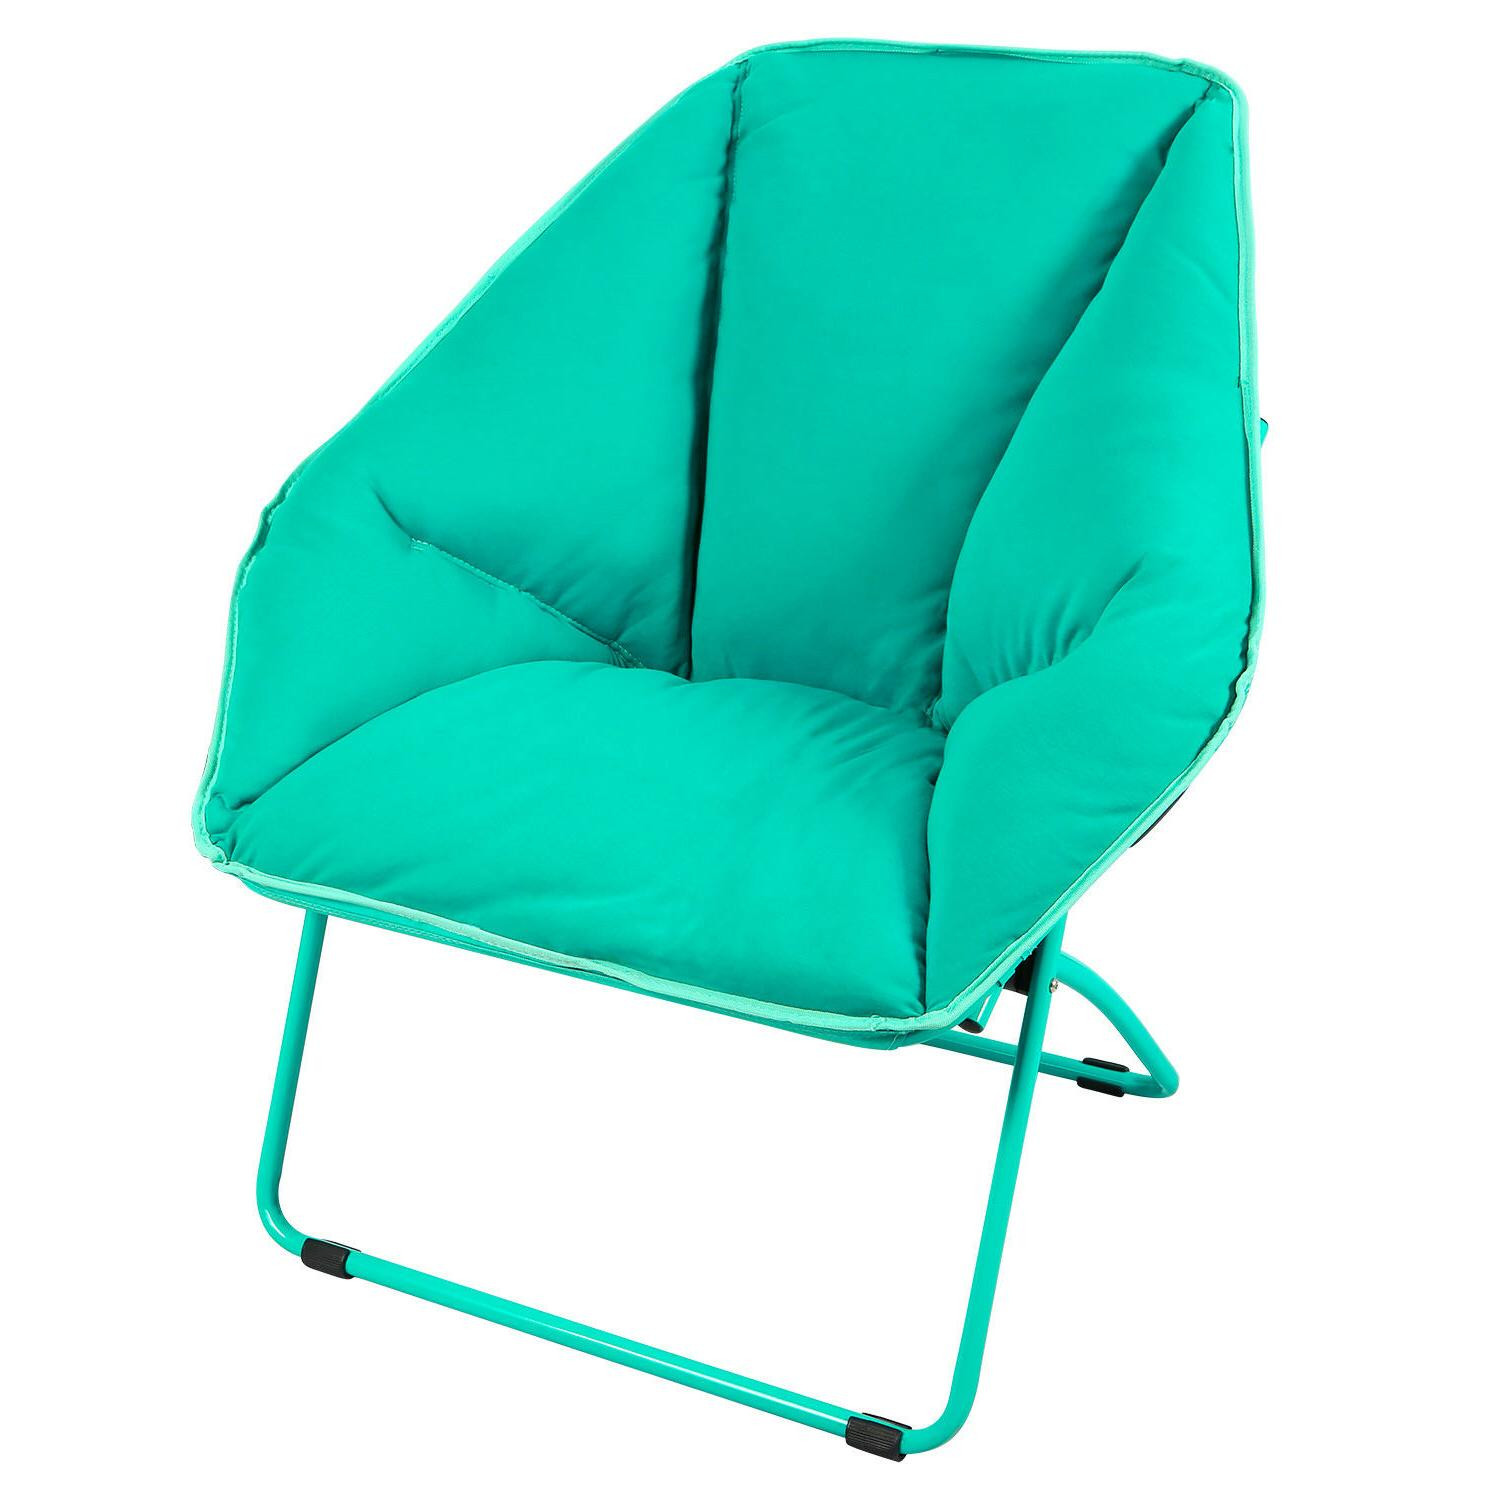 Oversized Kids Chair
 REDCAMP Oversized Saucer Chair for Teens Kids Adults